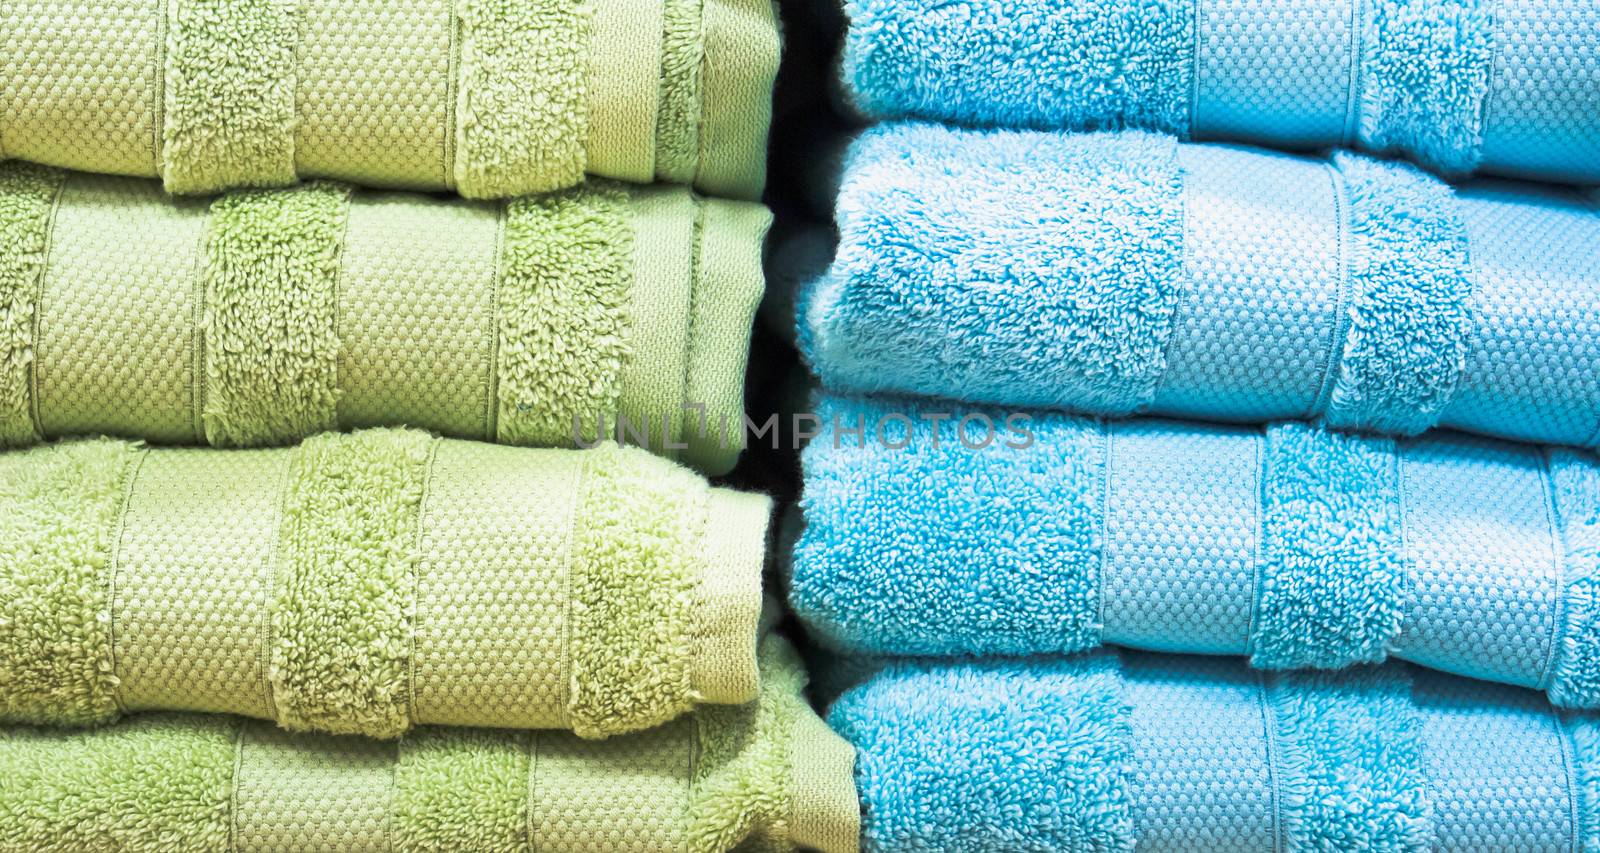 Stacks of blue and green towels